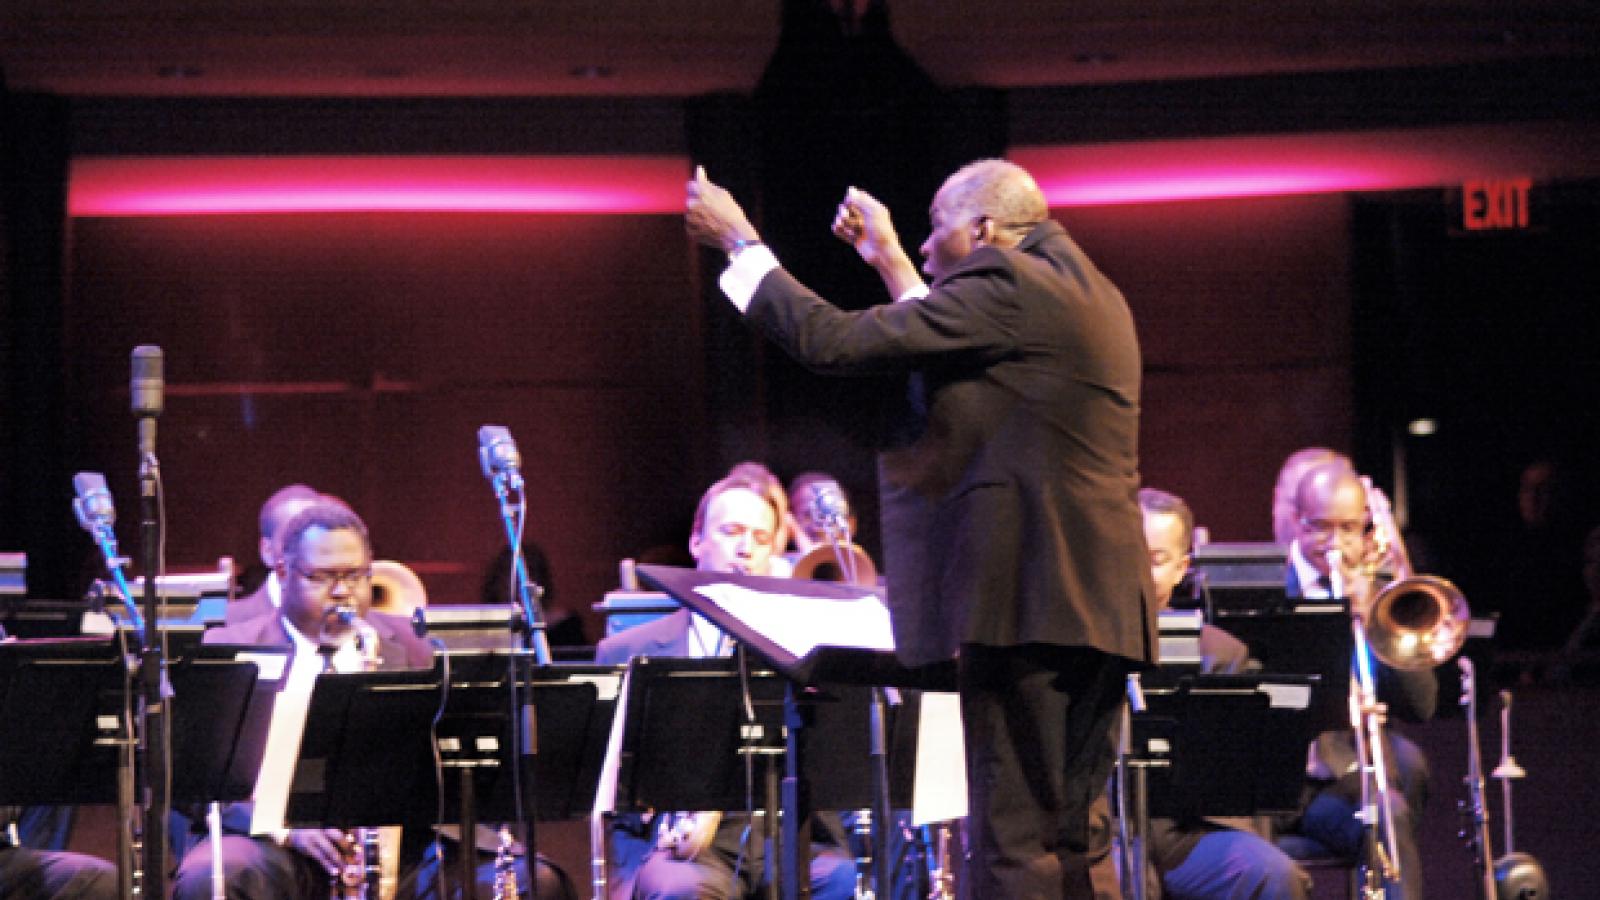 A man stands facing an orchestra with his arms raised